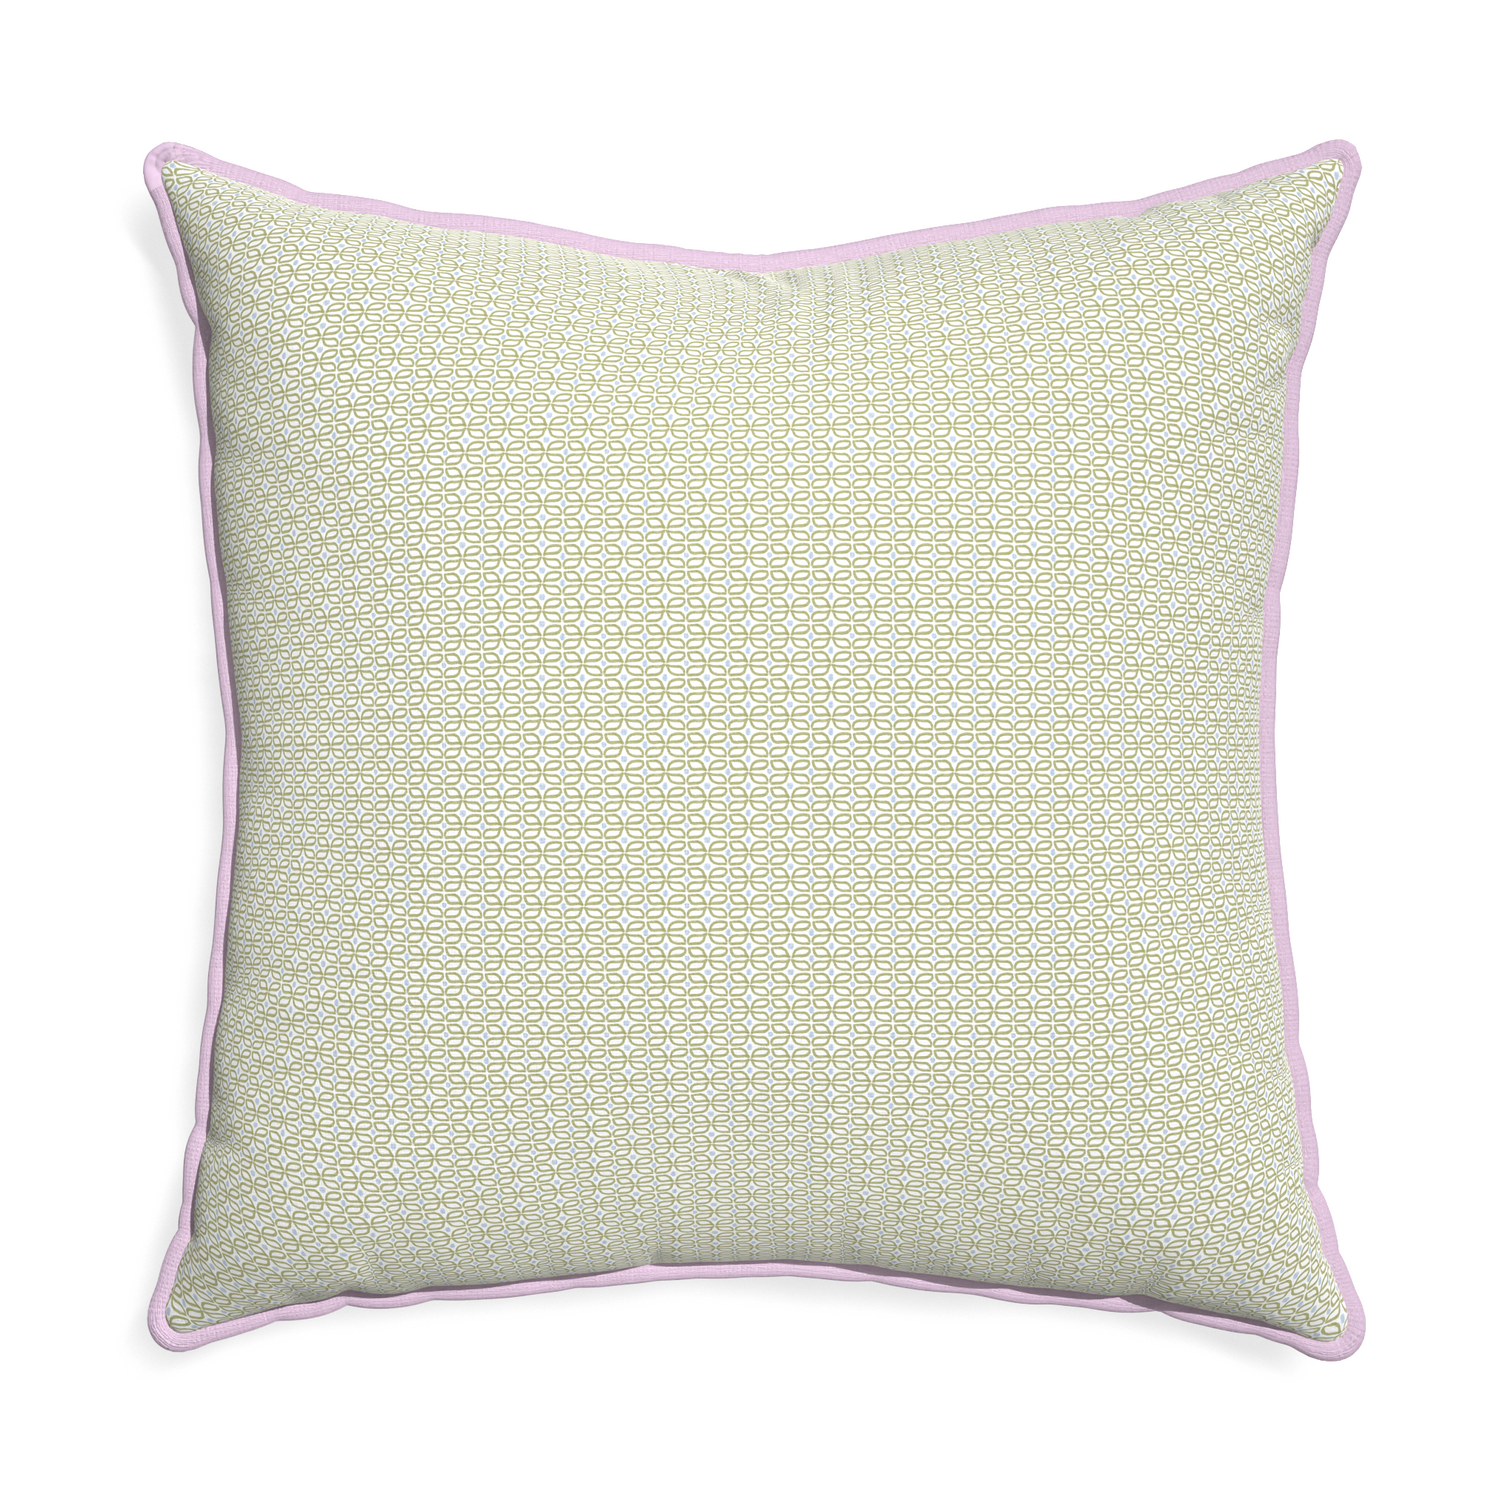 Euro-sham loomi moss custom moss green geometricpillow with l piping on white background